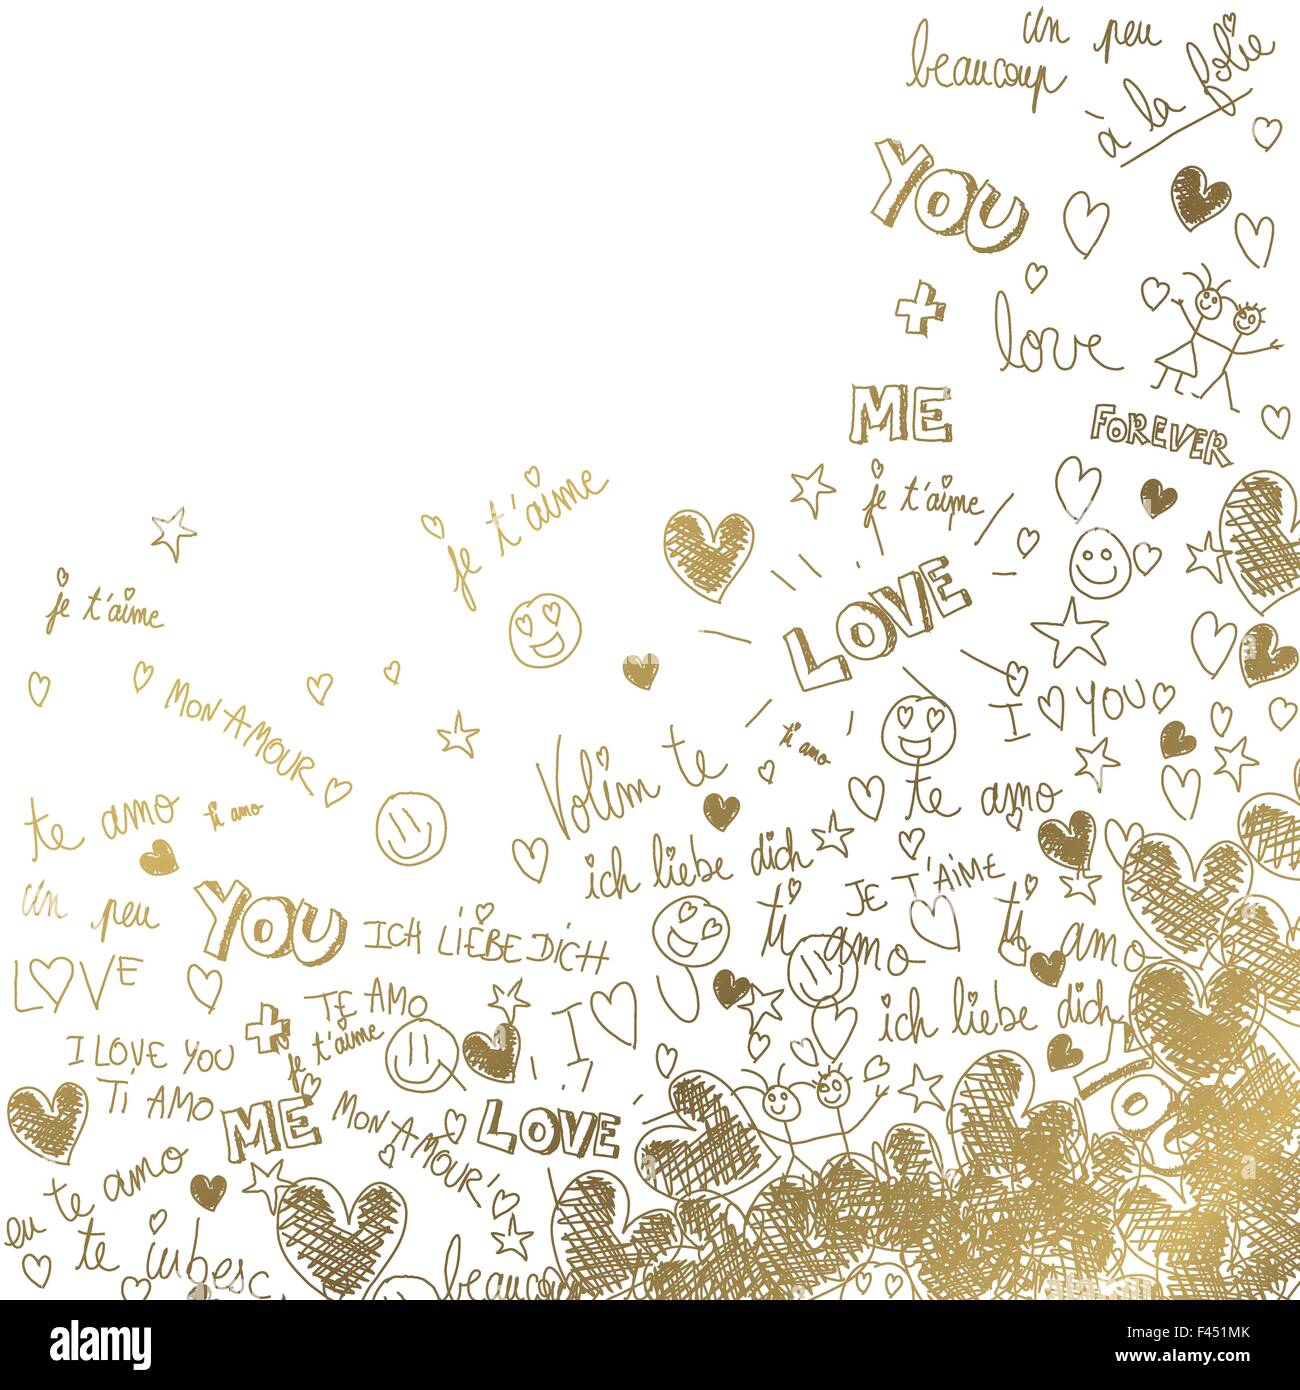 Gold love background with handmade doodles Stock Vector